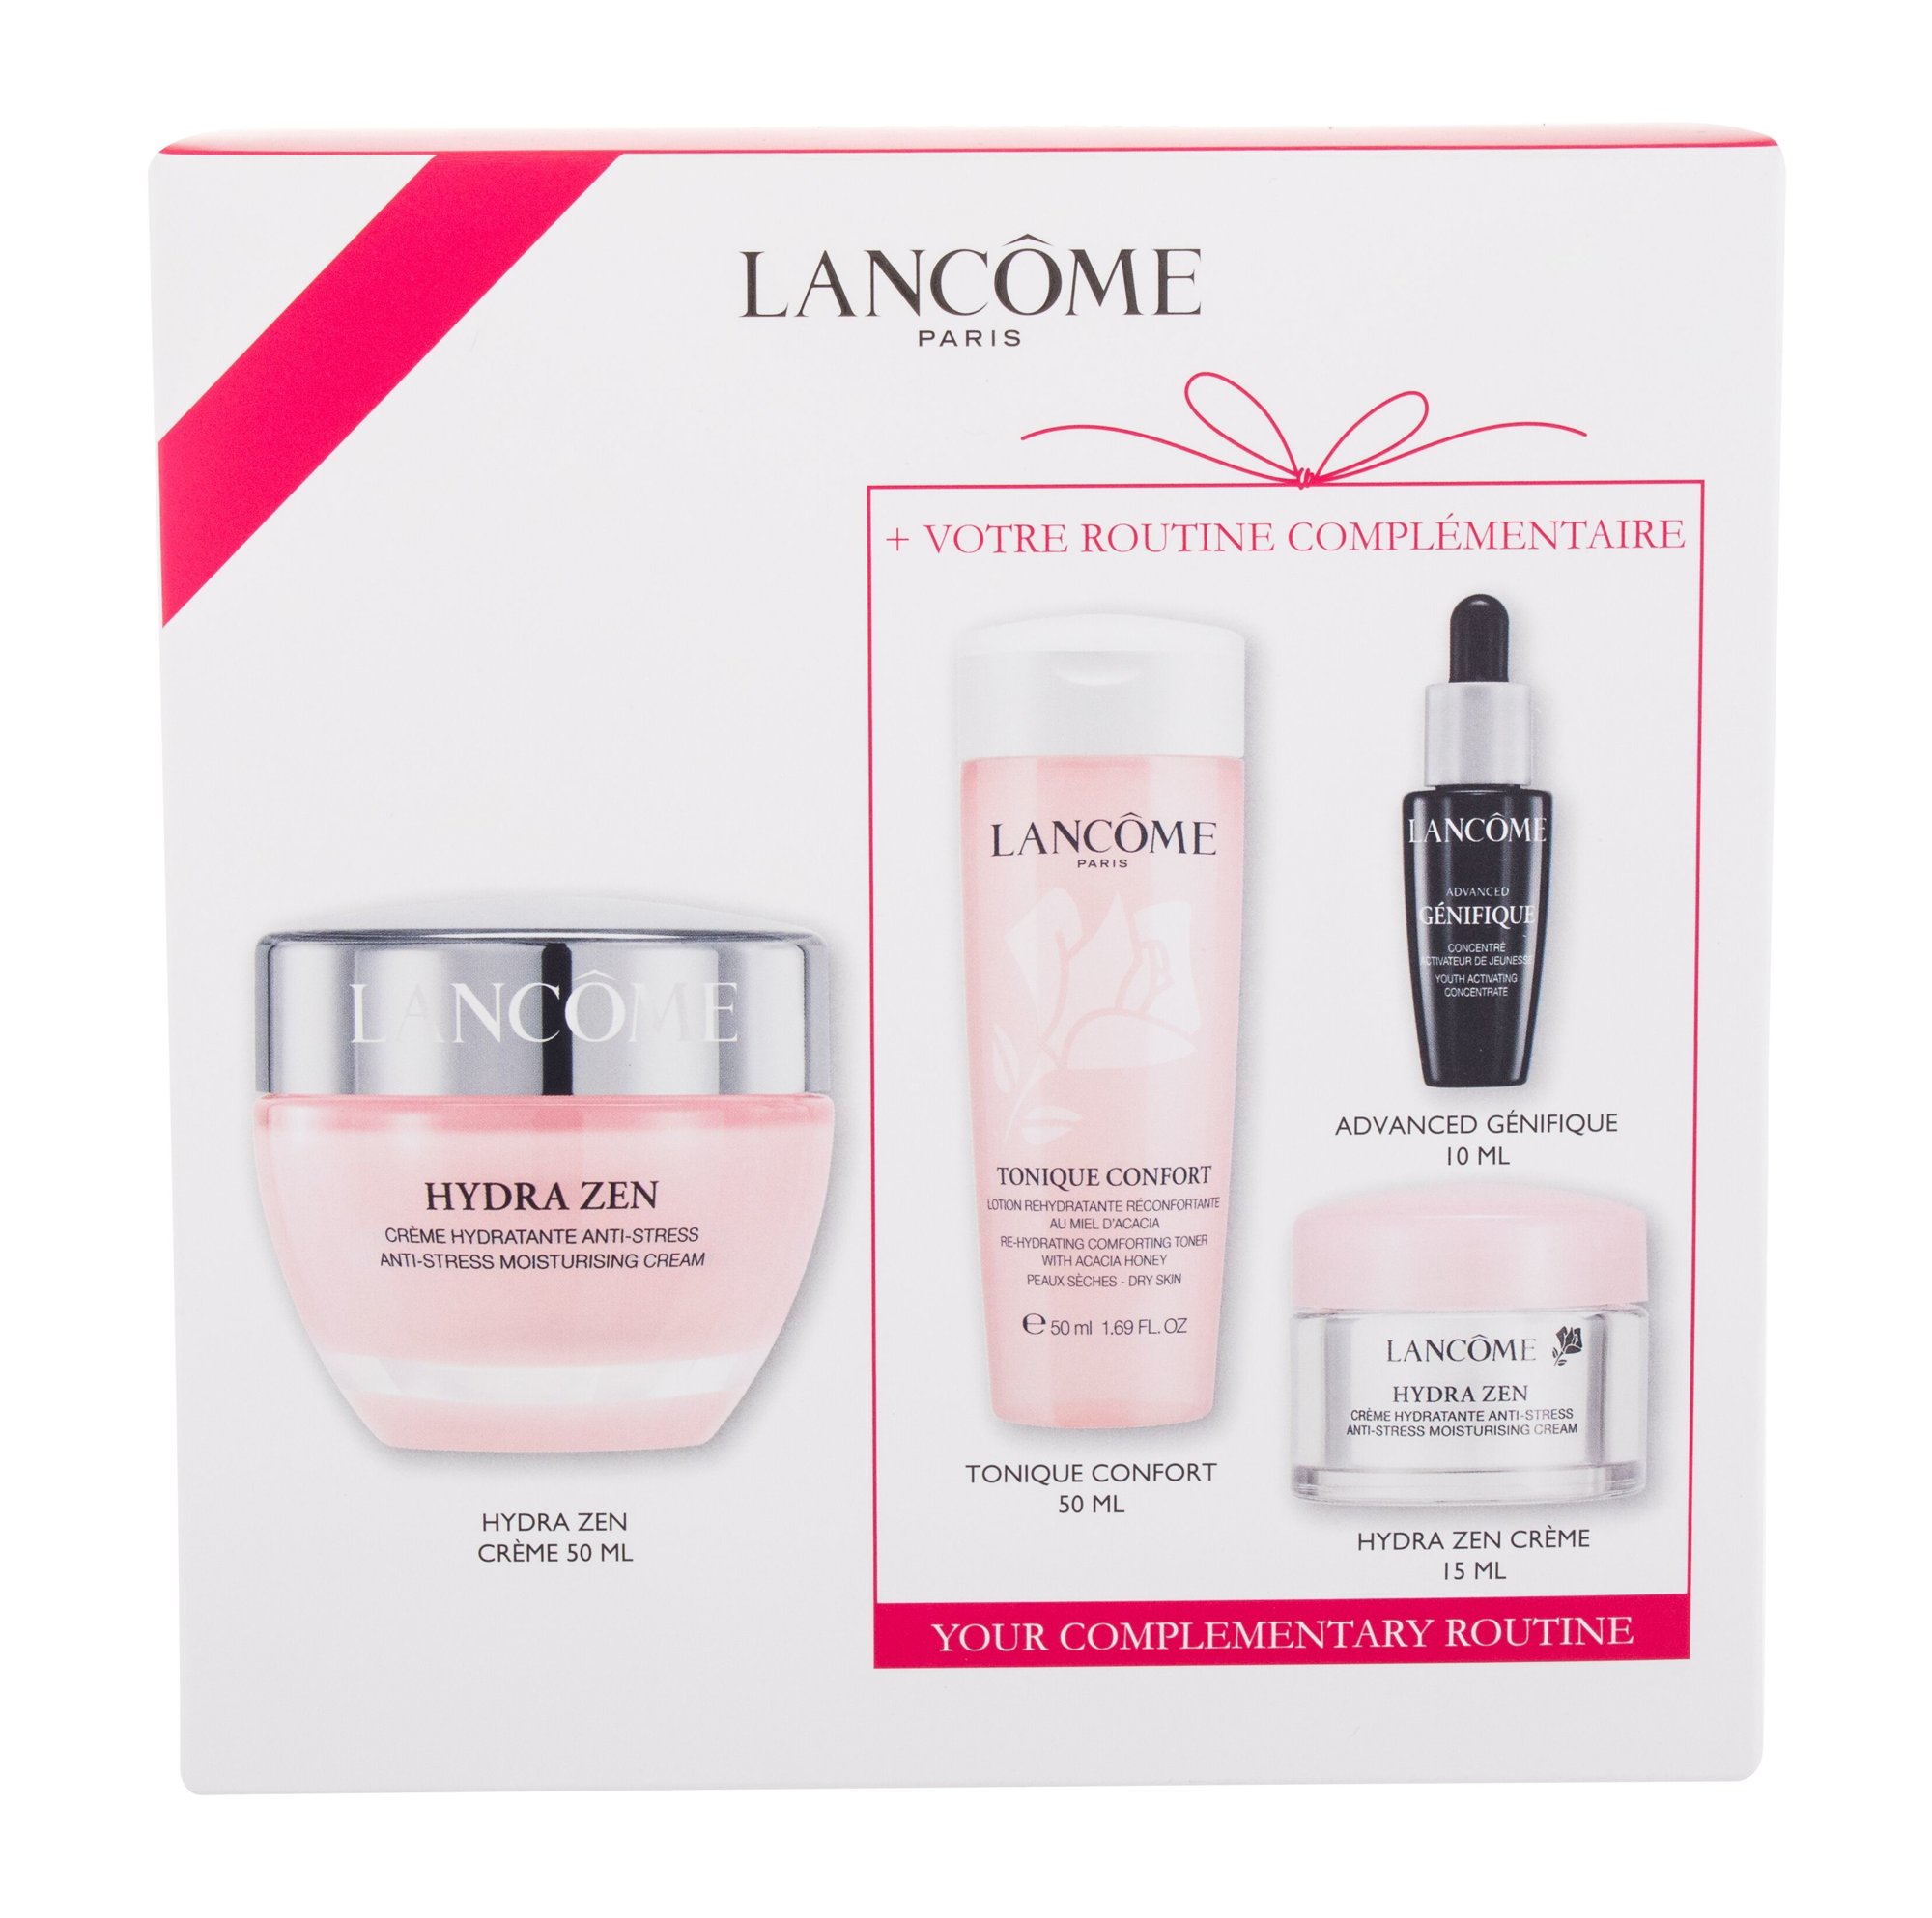 Lancome Hydra Zen My Soothing Routine Kit 50ml Hydra Zen Moisturizing Day Cream 50 ml + Hydra Zen Moisturizing Day Cream 15 ml + Tonique Confort Comforting Toner 50 ml + Advanced Génifique Youth Activating Concentrate 10 ml dieninis kremas Rinkinys